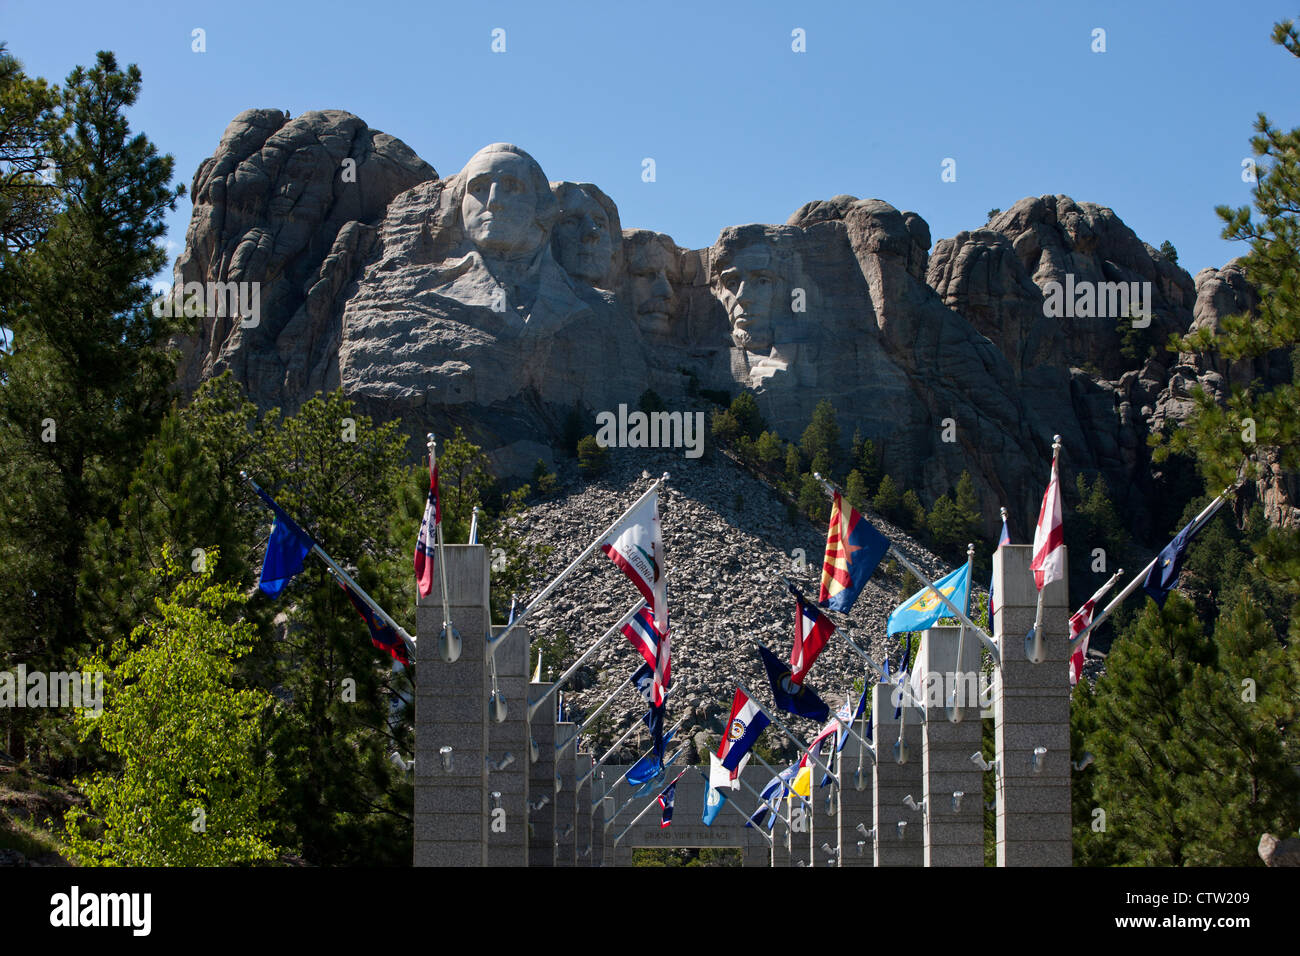 View of Mt. Rushmore with state flags from the United States, Mount Rushmore National Monument, South Dakota, United States of America Stock Photo